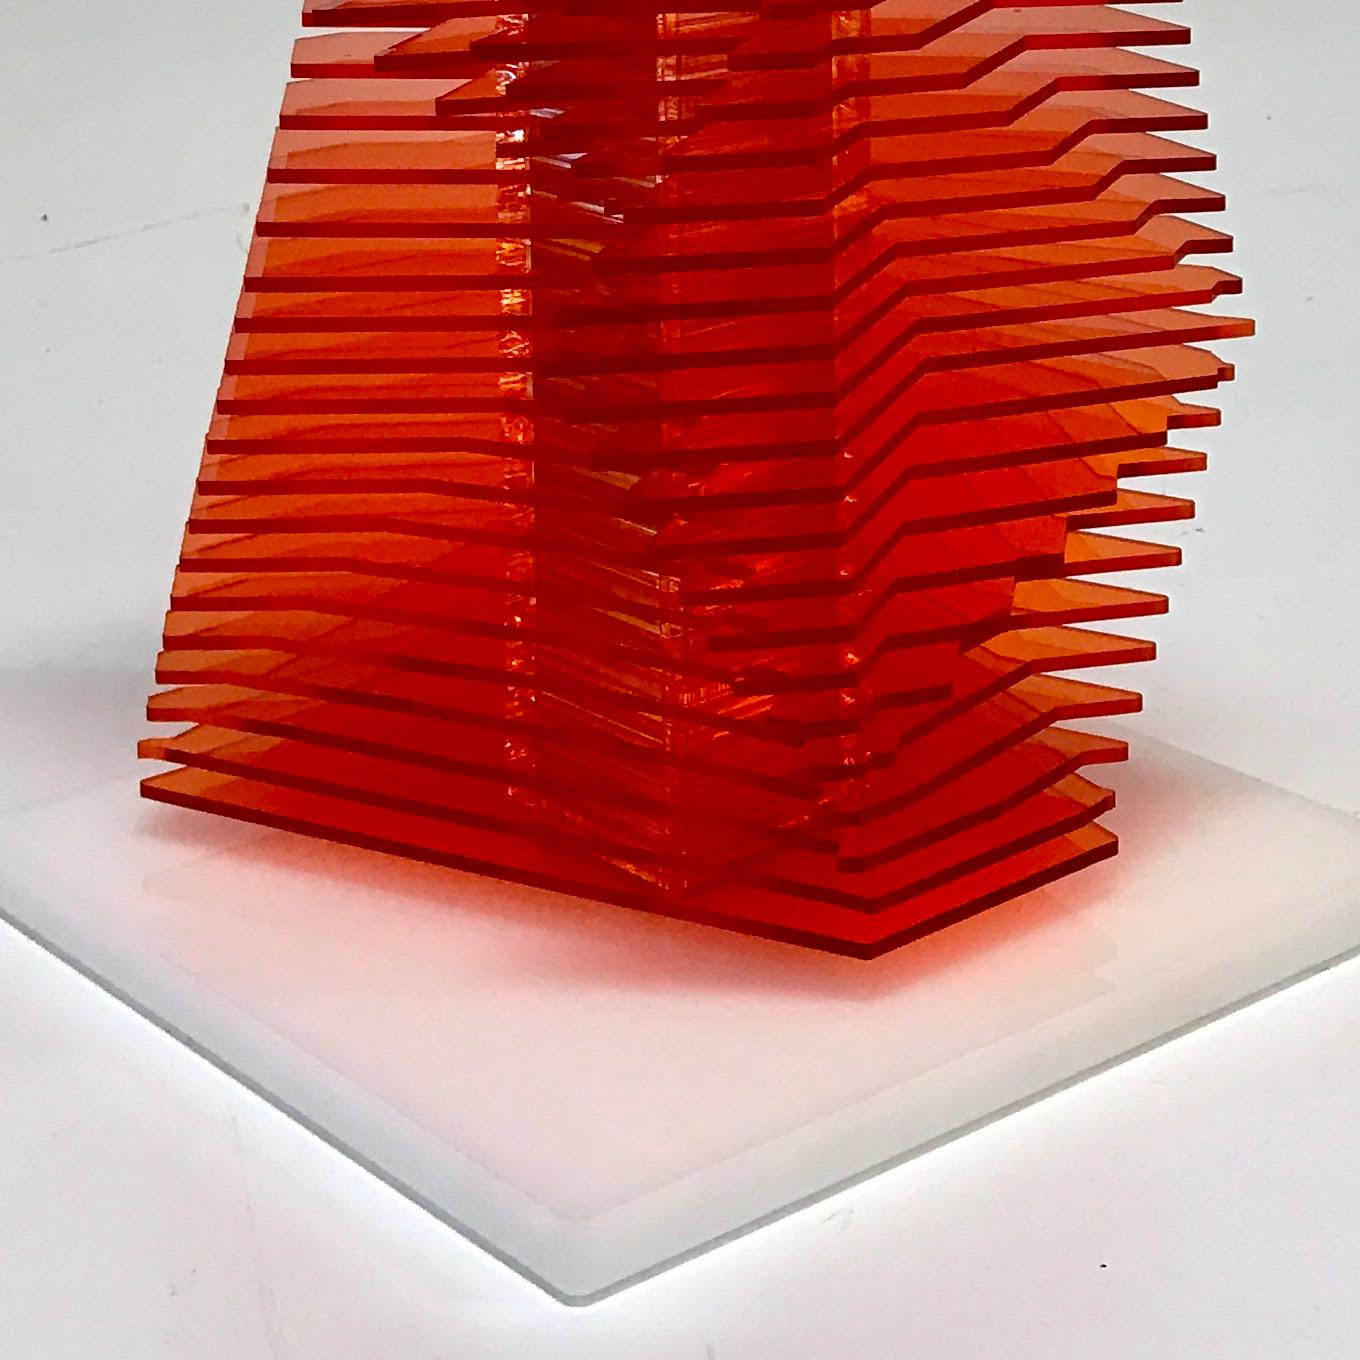 Zaha Amber - kinetic sculpture by J. Margulis - Sculpture by Jose Margulis